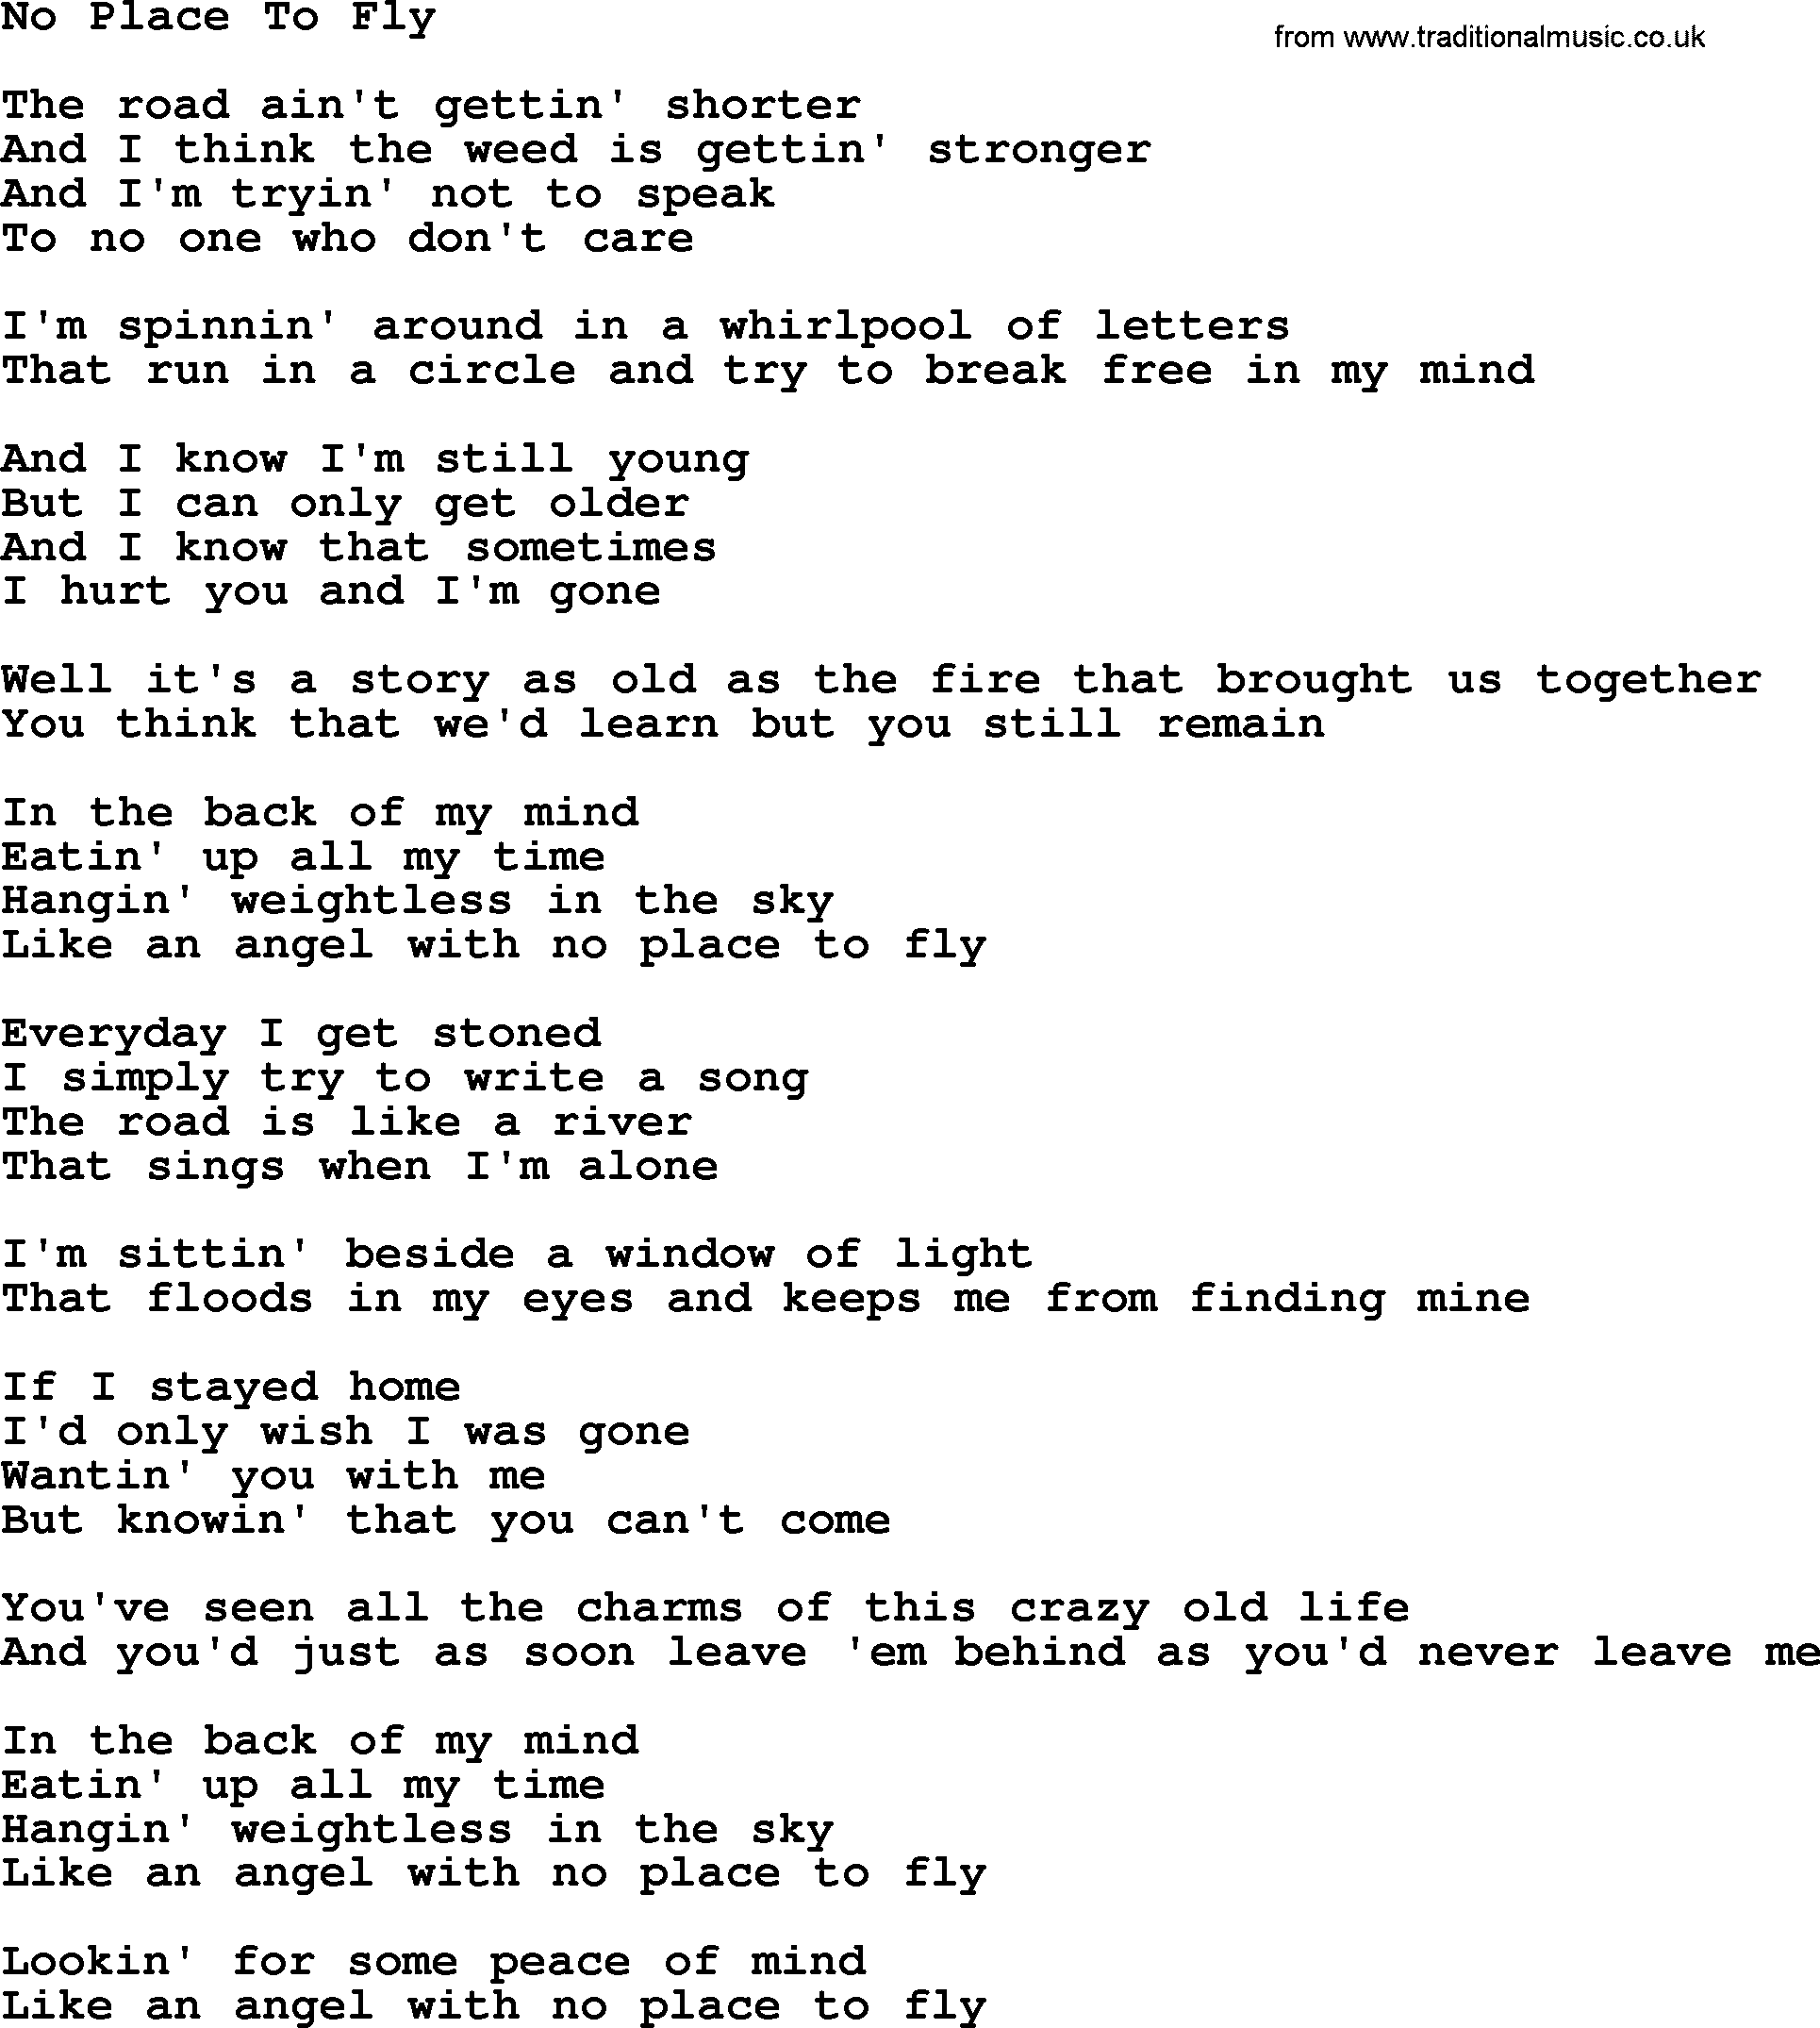 Willie Nelson song: No Place To Fly lyrics